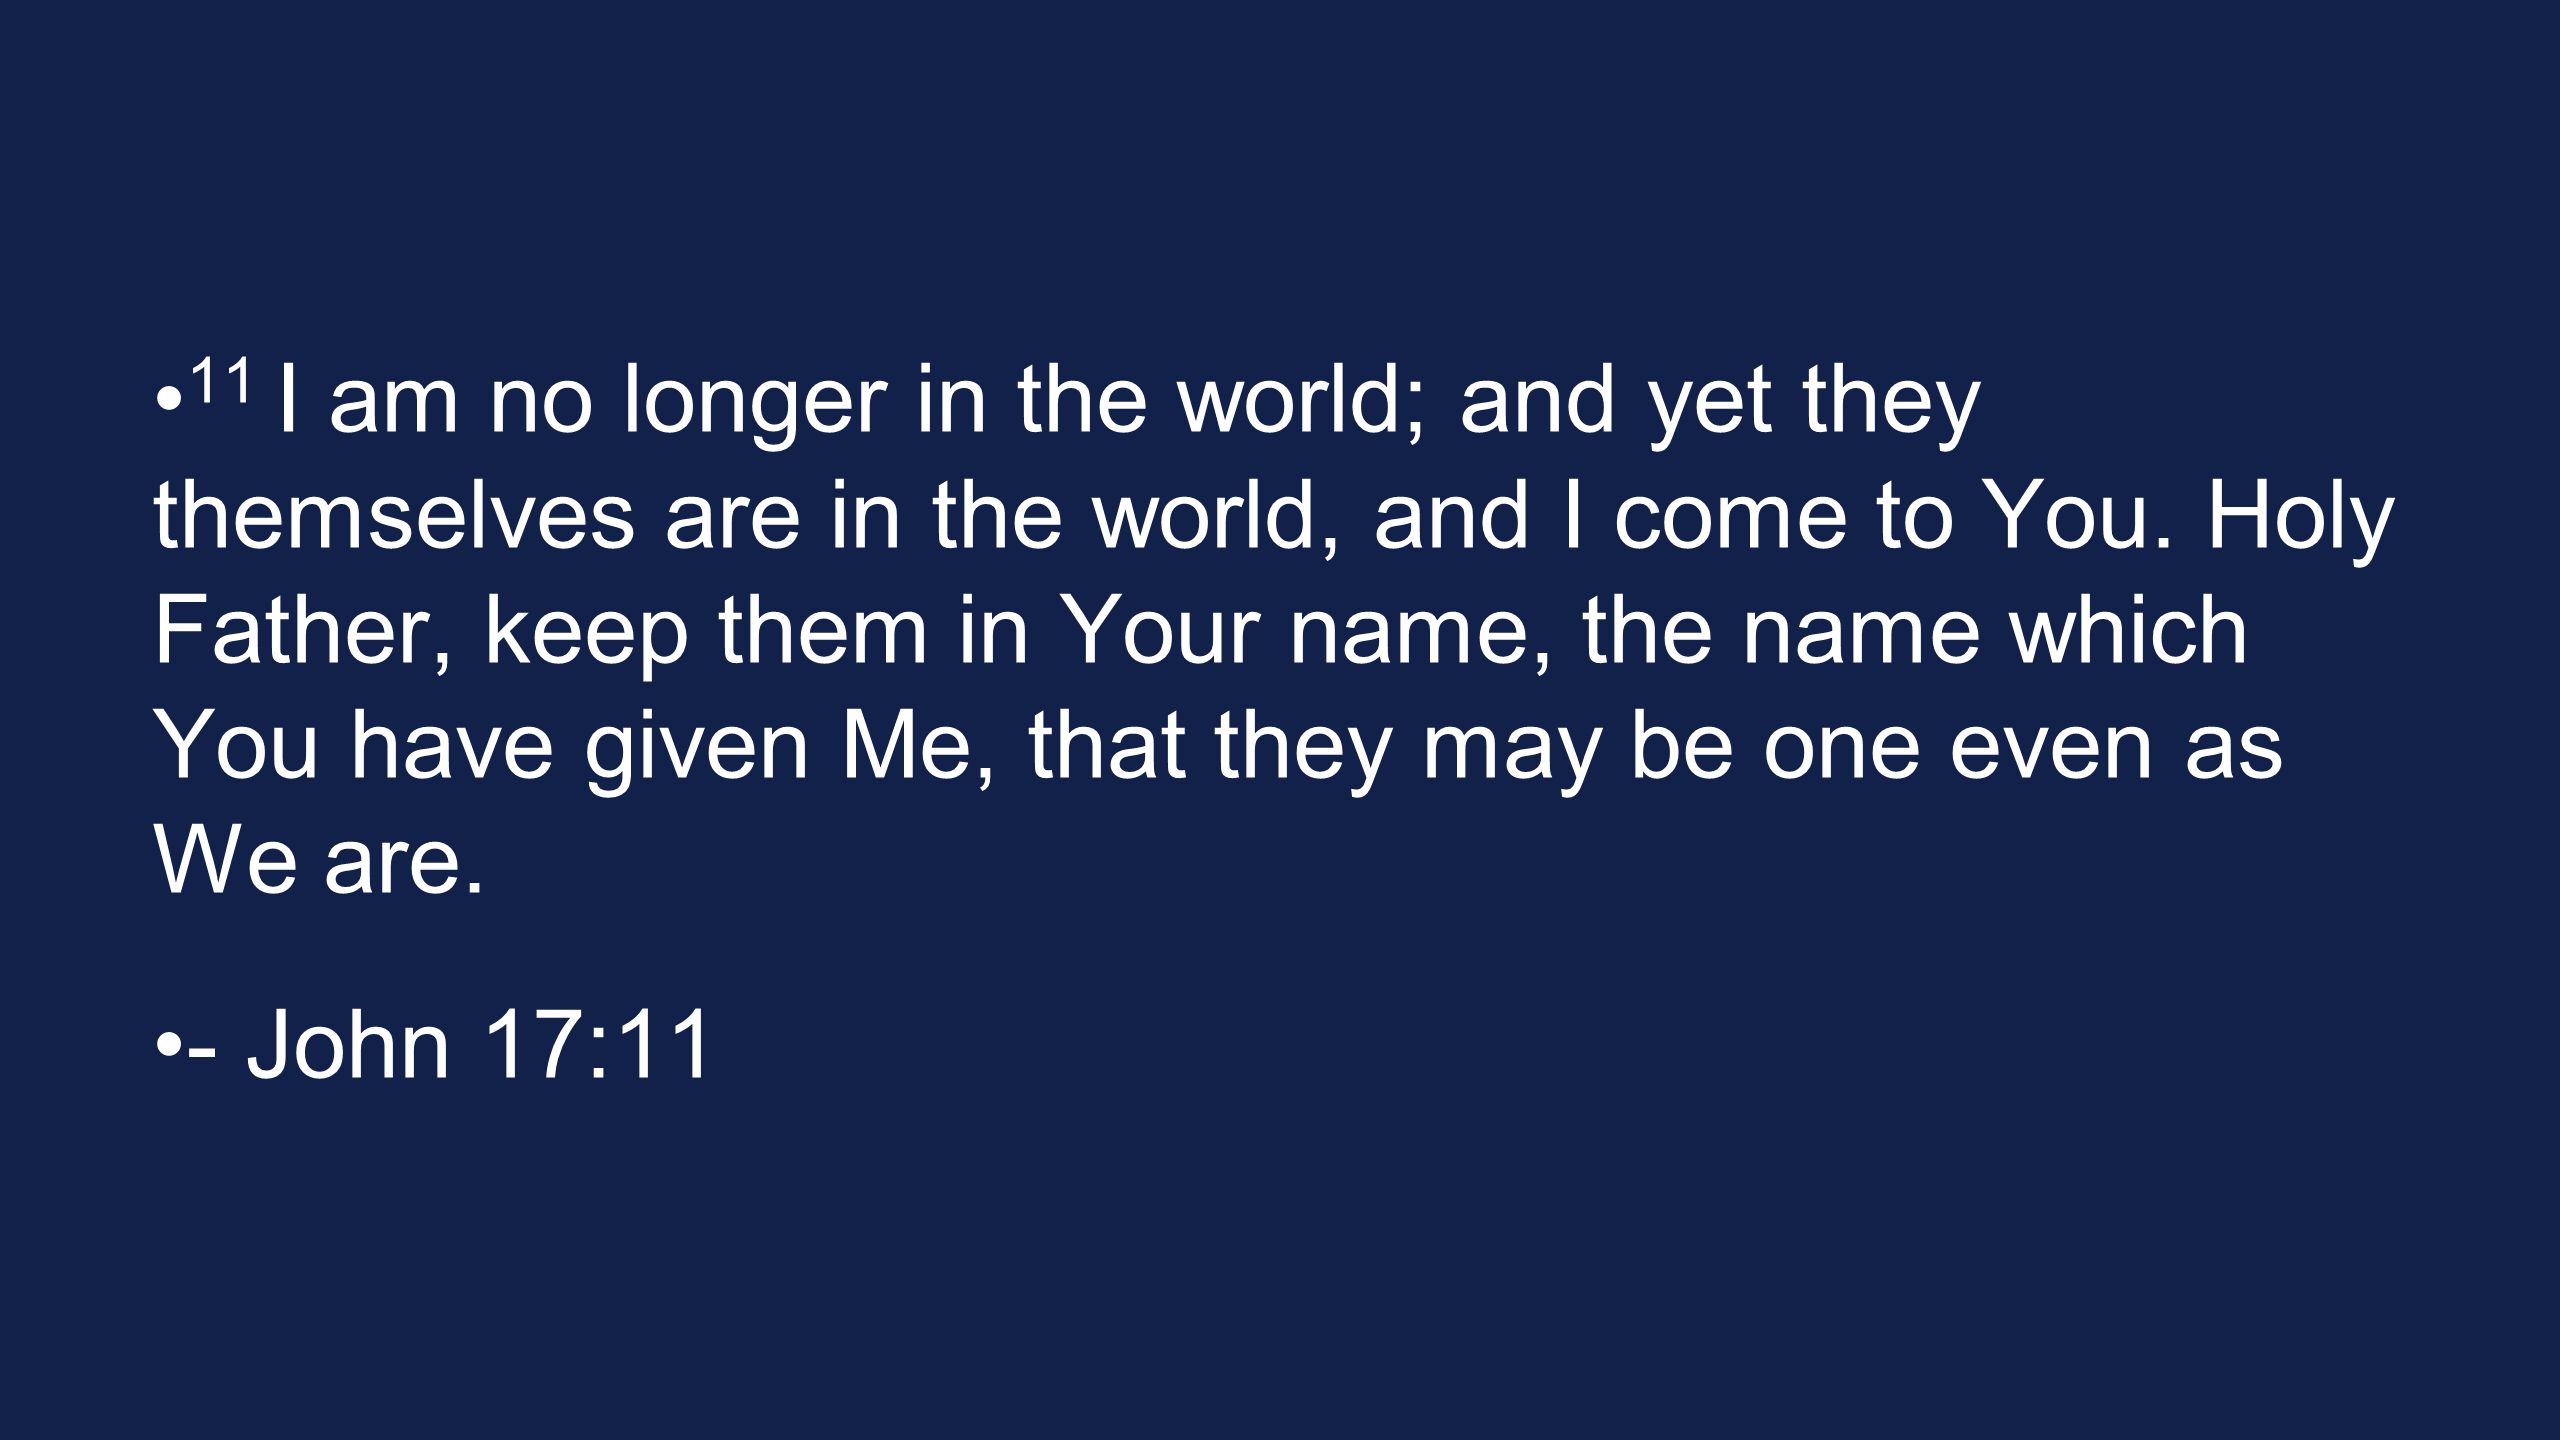 11 I am no longer in the world; and yet they themselves are in the world, and I come to You. Holy Father, keep them in Your name, the name which You have given Me, that they may be one even as We are.